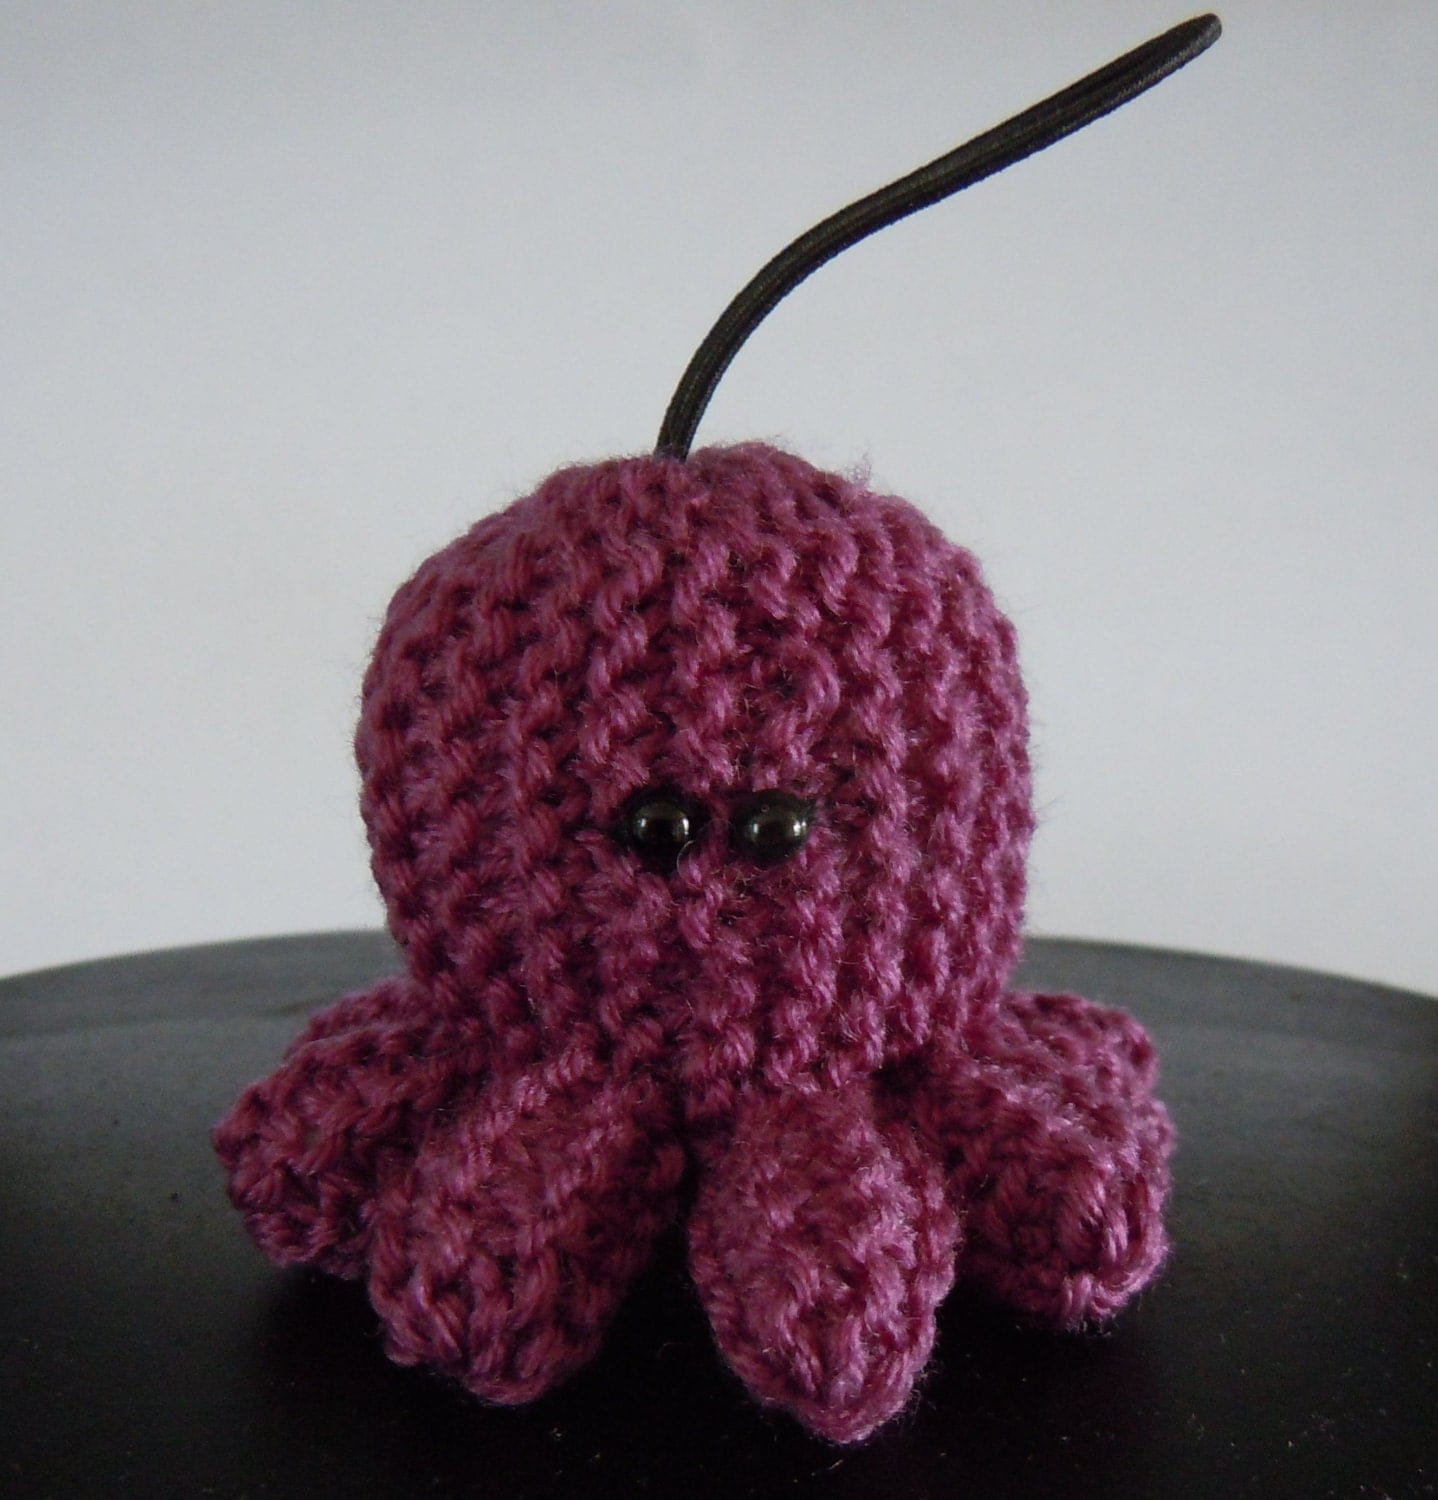 How to knit an octopus instructions for knitting your own